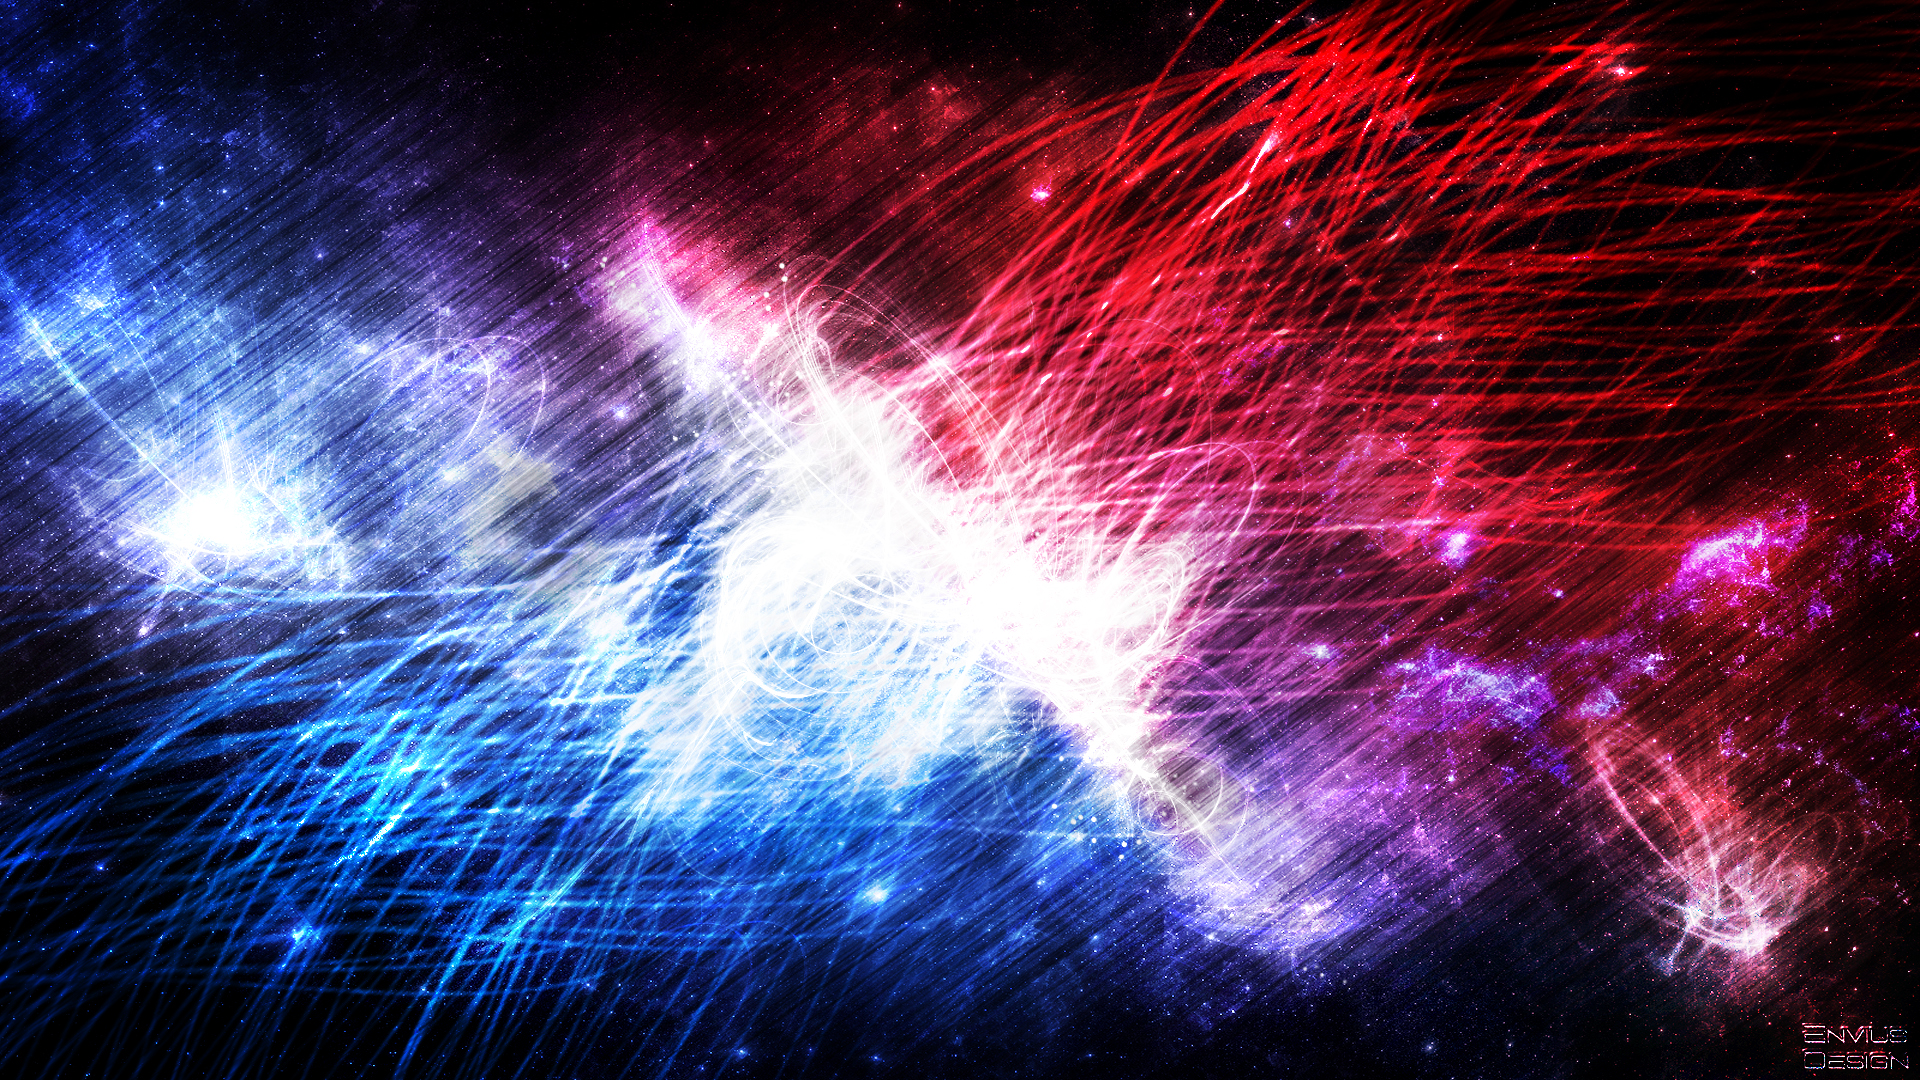 Red White And Blue Background Photos Download The BEST Free Red White And Blue  Background Stock Photos  HD Images